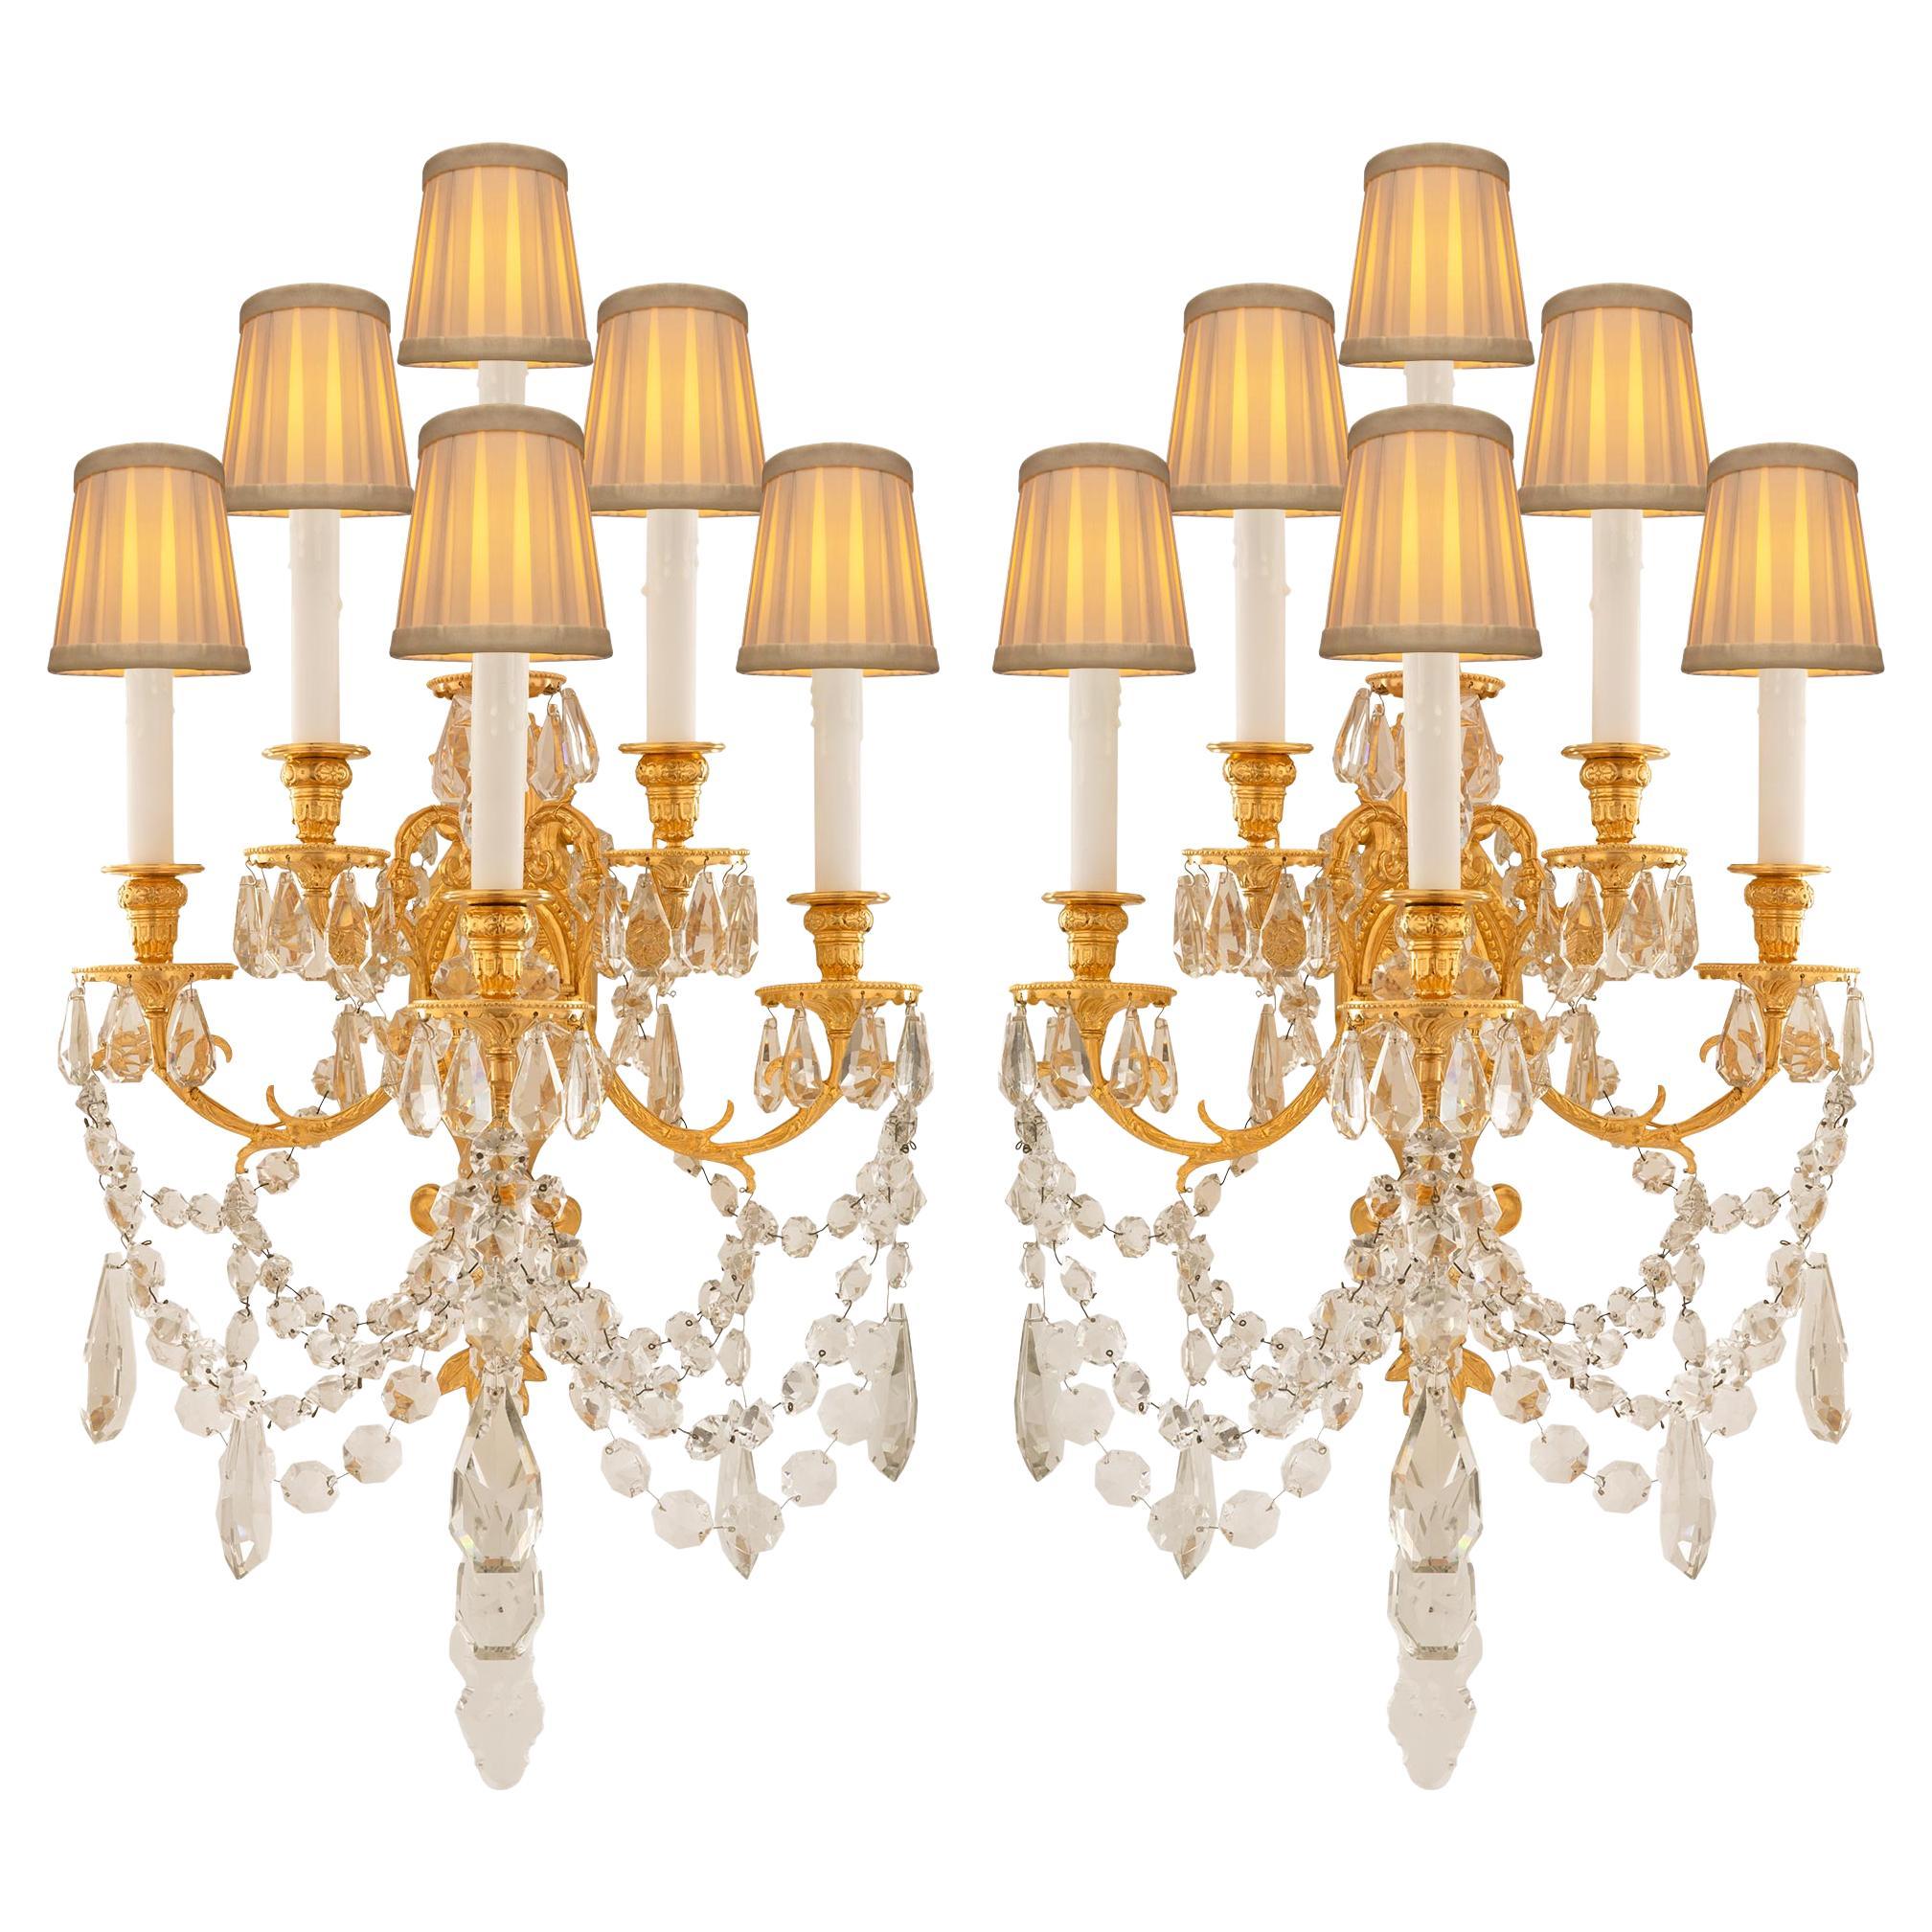 Pair of French 19th Century Louis XVI St. Ormolu and Baccarat Crystal Sconces